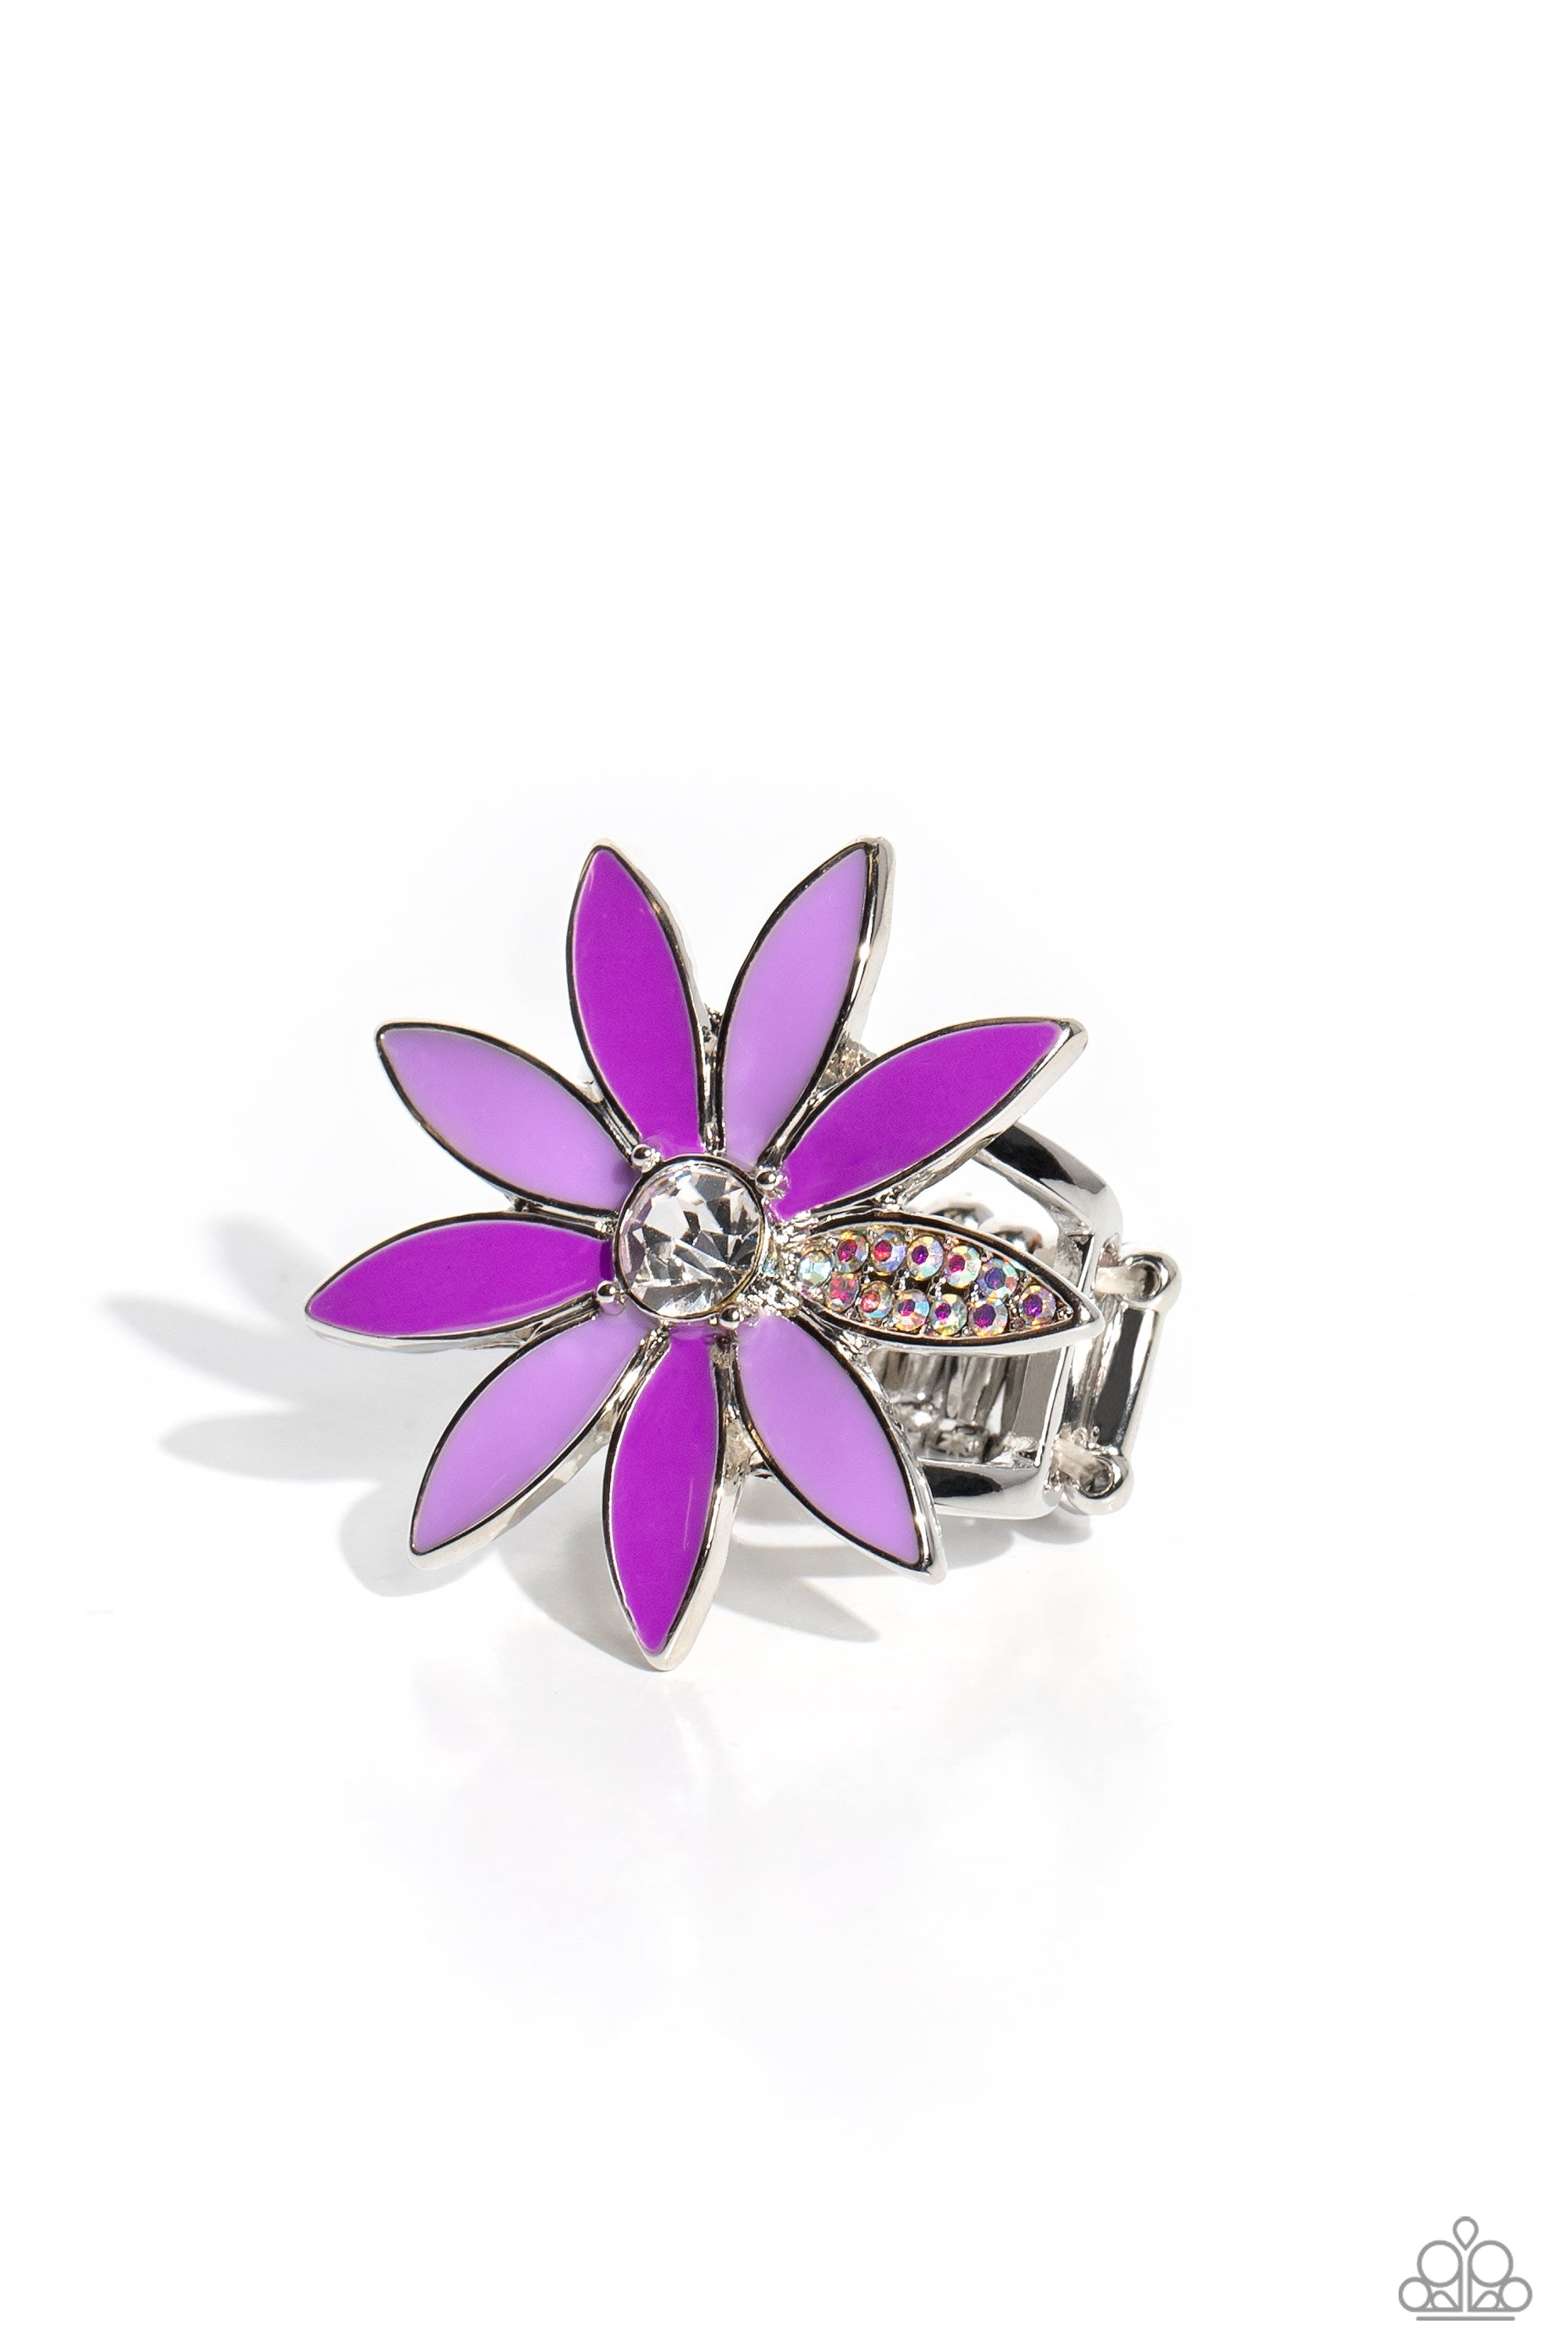 Lily Lei Purple Flower Ring - Paparazzi Accessories- lightbox - CarasShop.com - $5 Jewelry by Cara Jewels